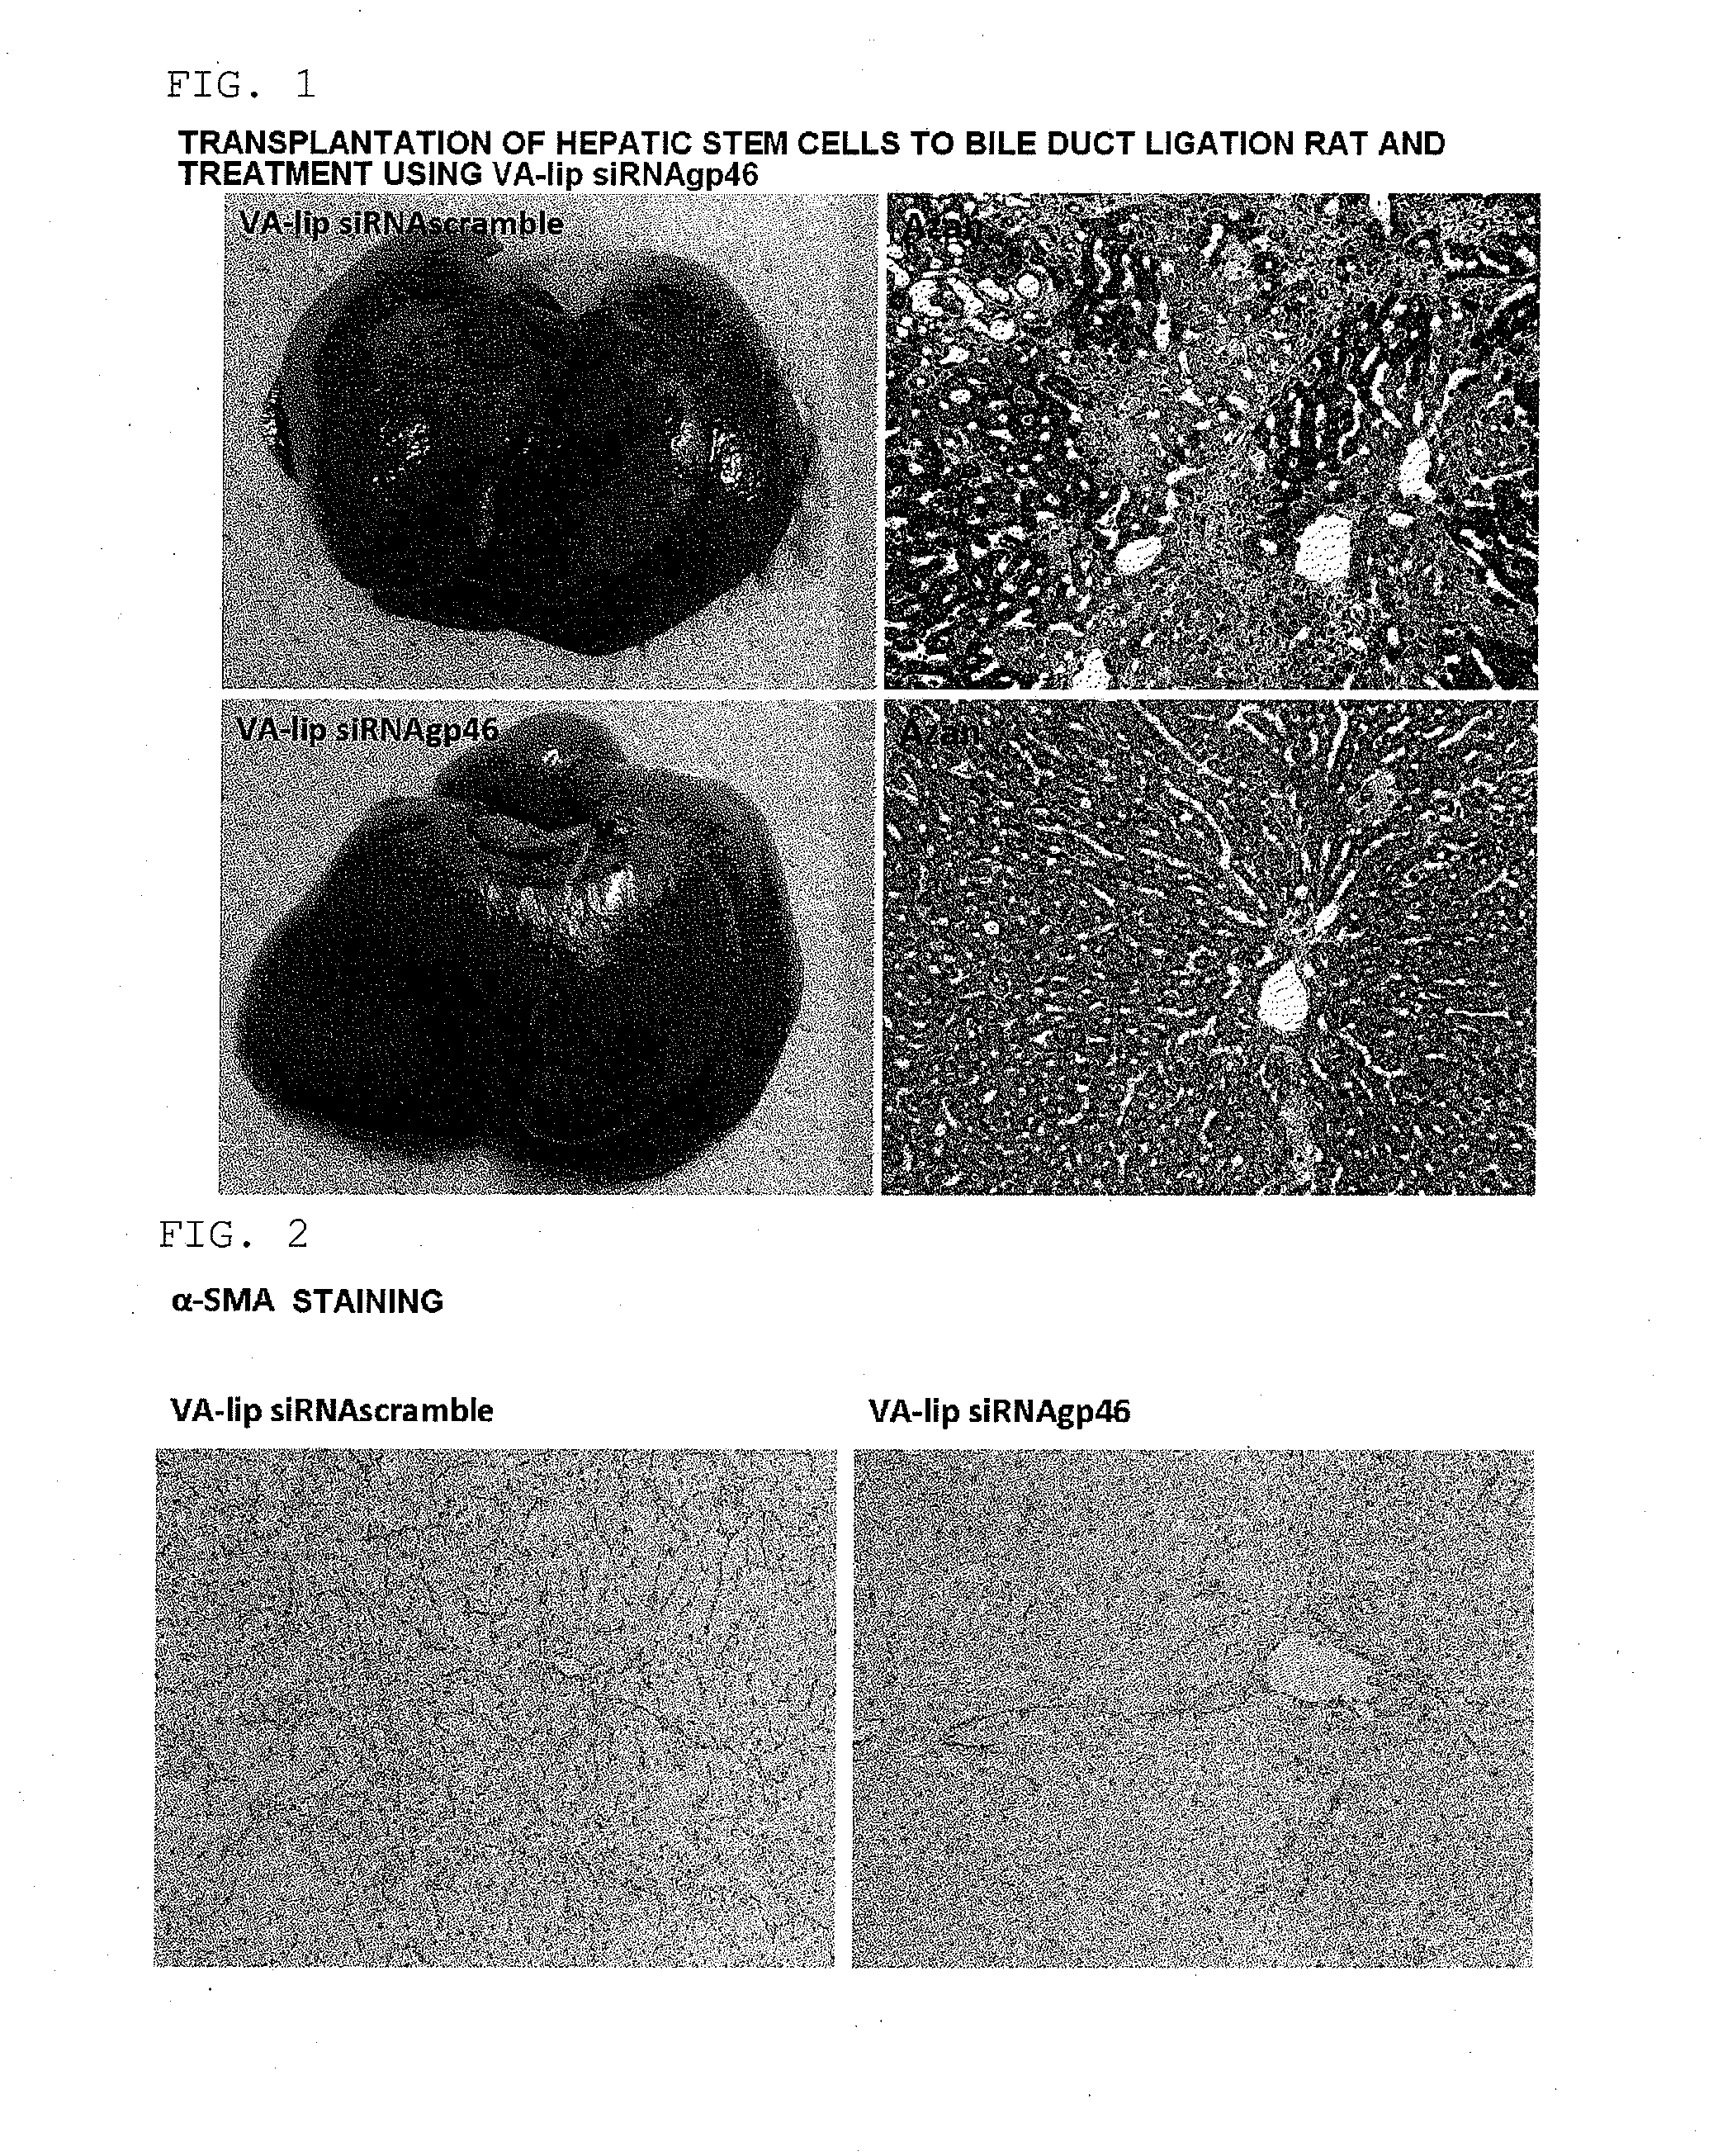 Composition for regenerating normal tissue from fibrotic tissue